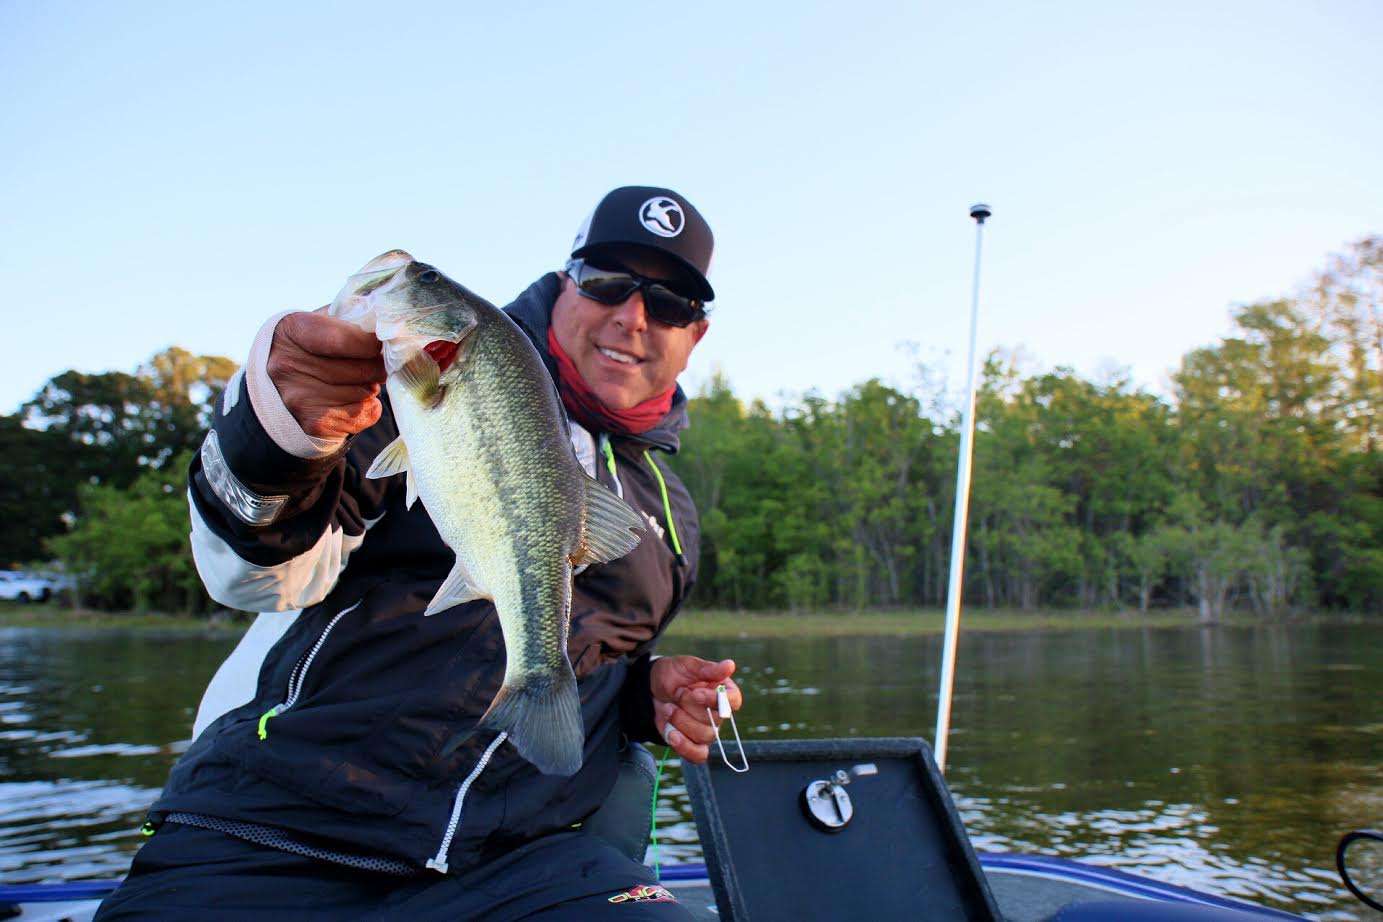 Dean Rojas is on the board. Fishing topwater in dead calm water just as the sun is coming out. 